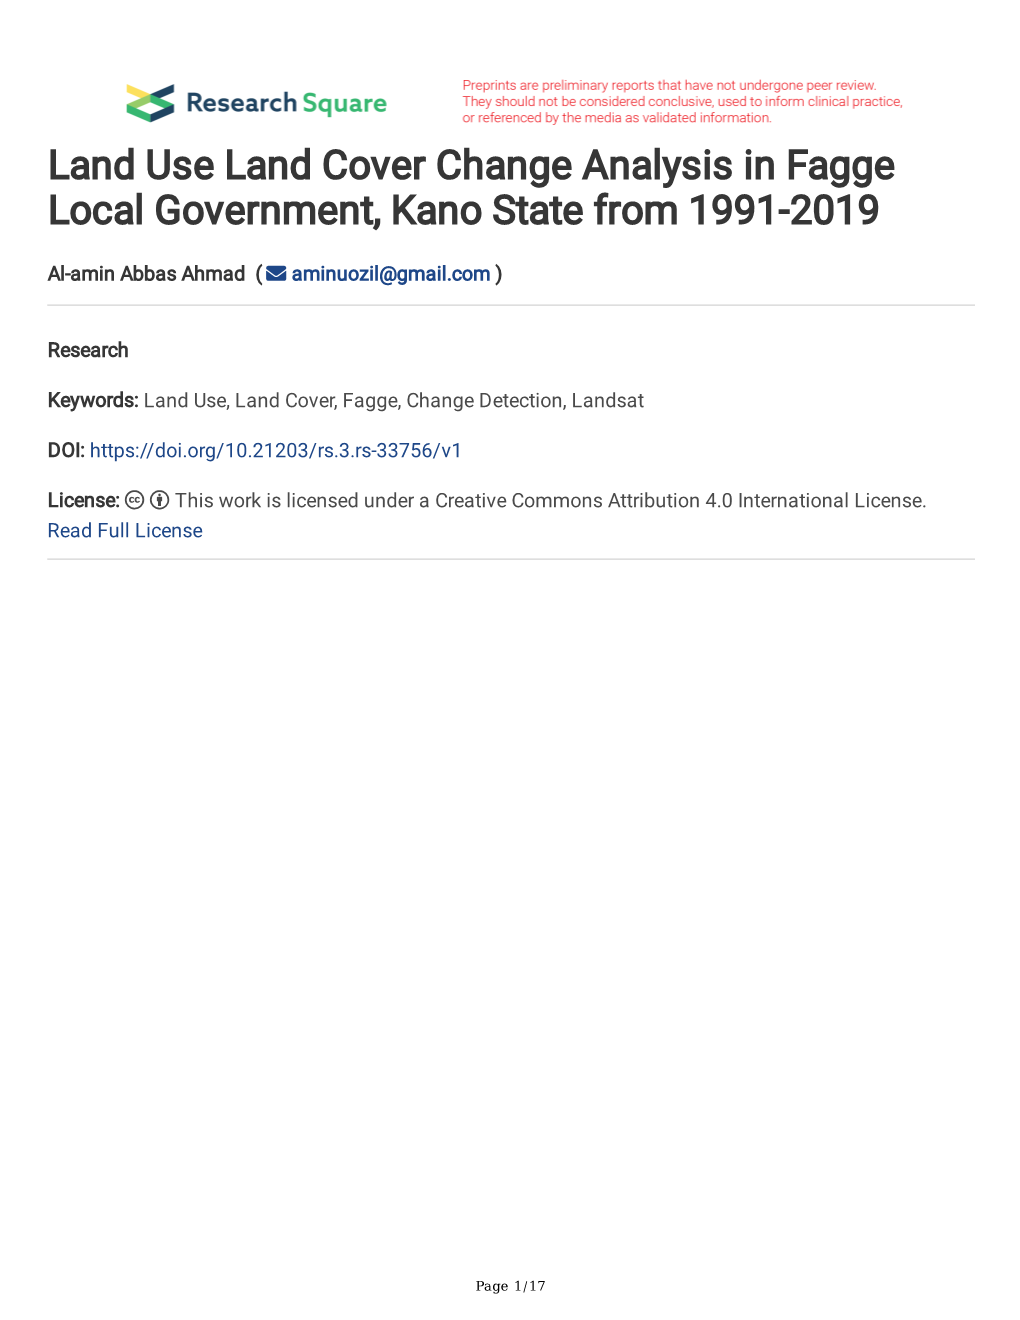 Land Use Land Cover Change Analysis in Fagge Local Government, Kano State from 1991-2019